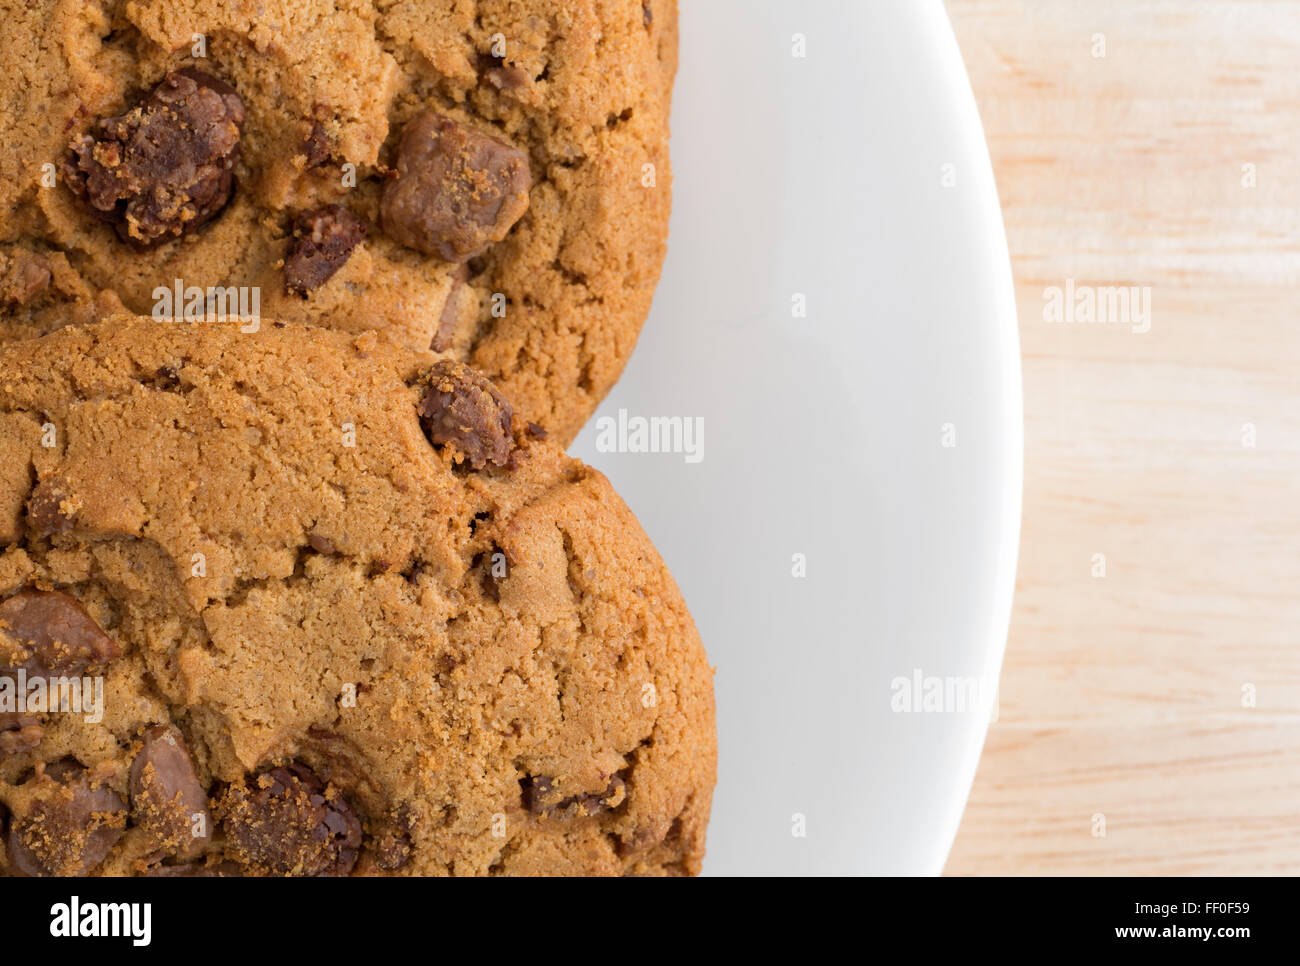 Top close view of a plate of milk chocolate chip cookies on a wood table illuminated with natural light. Stock Photo